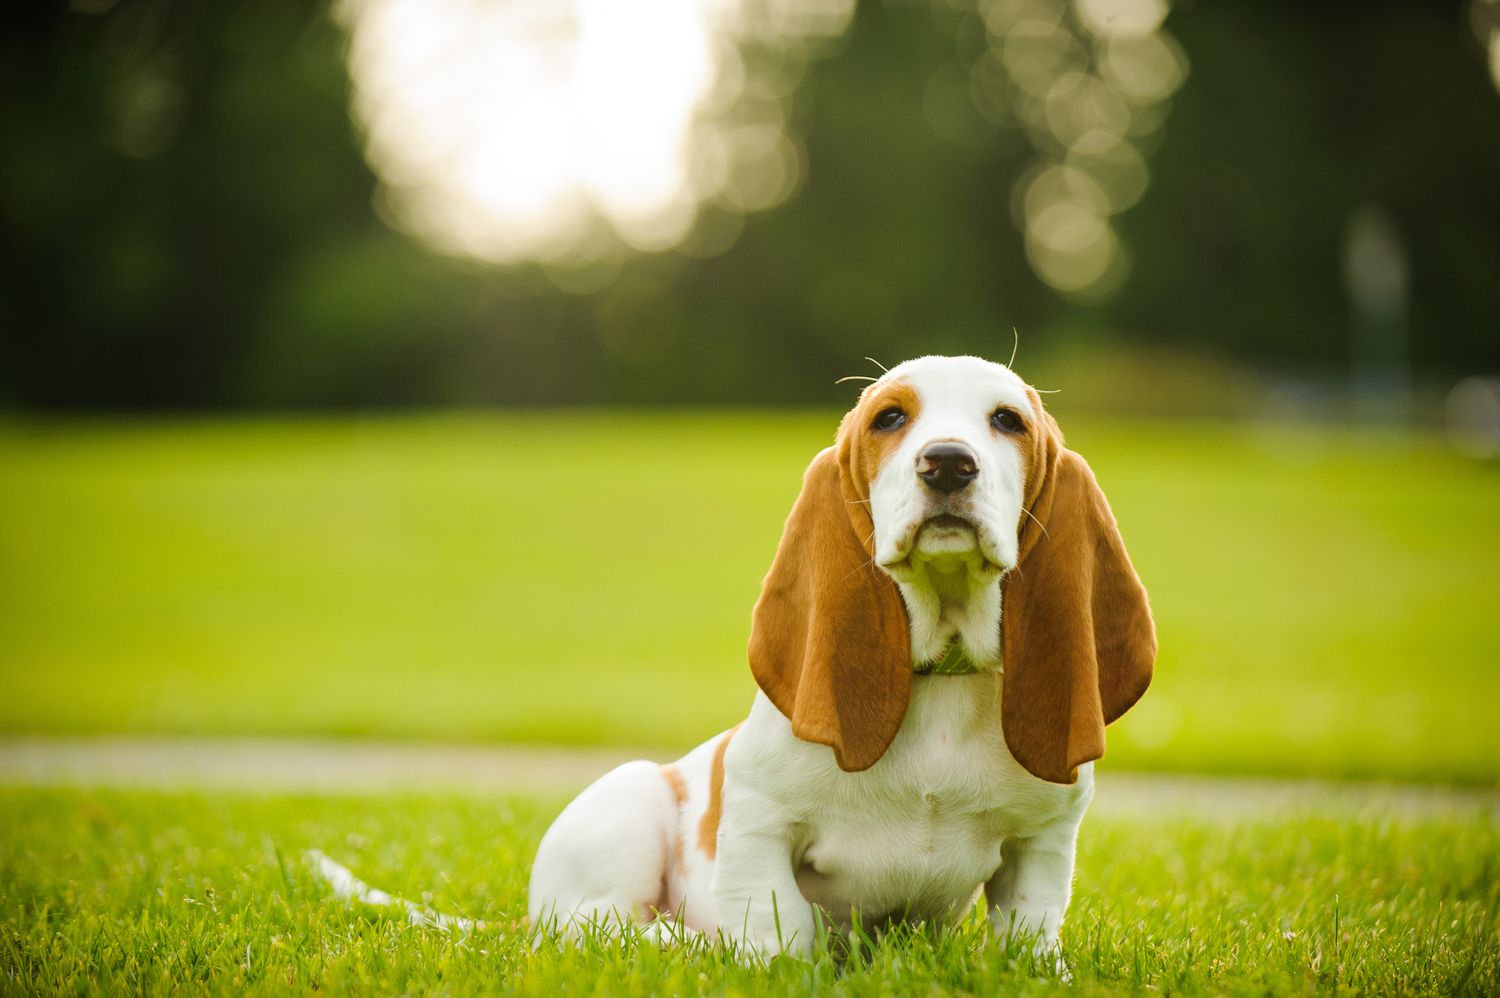 Basset Hound puppy with long ears sitting in grass.